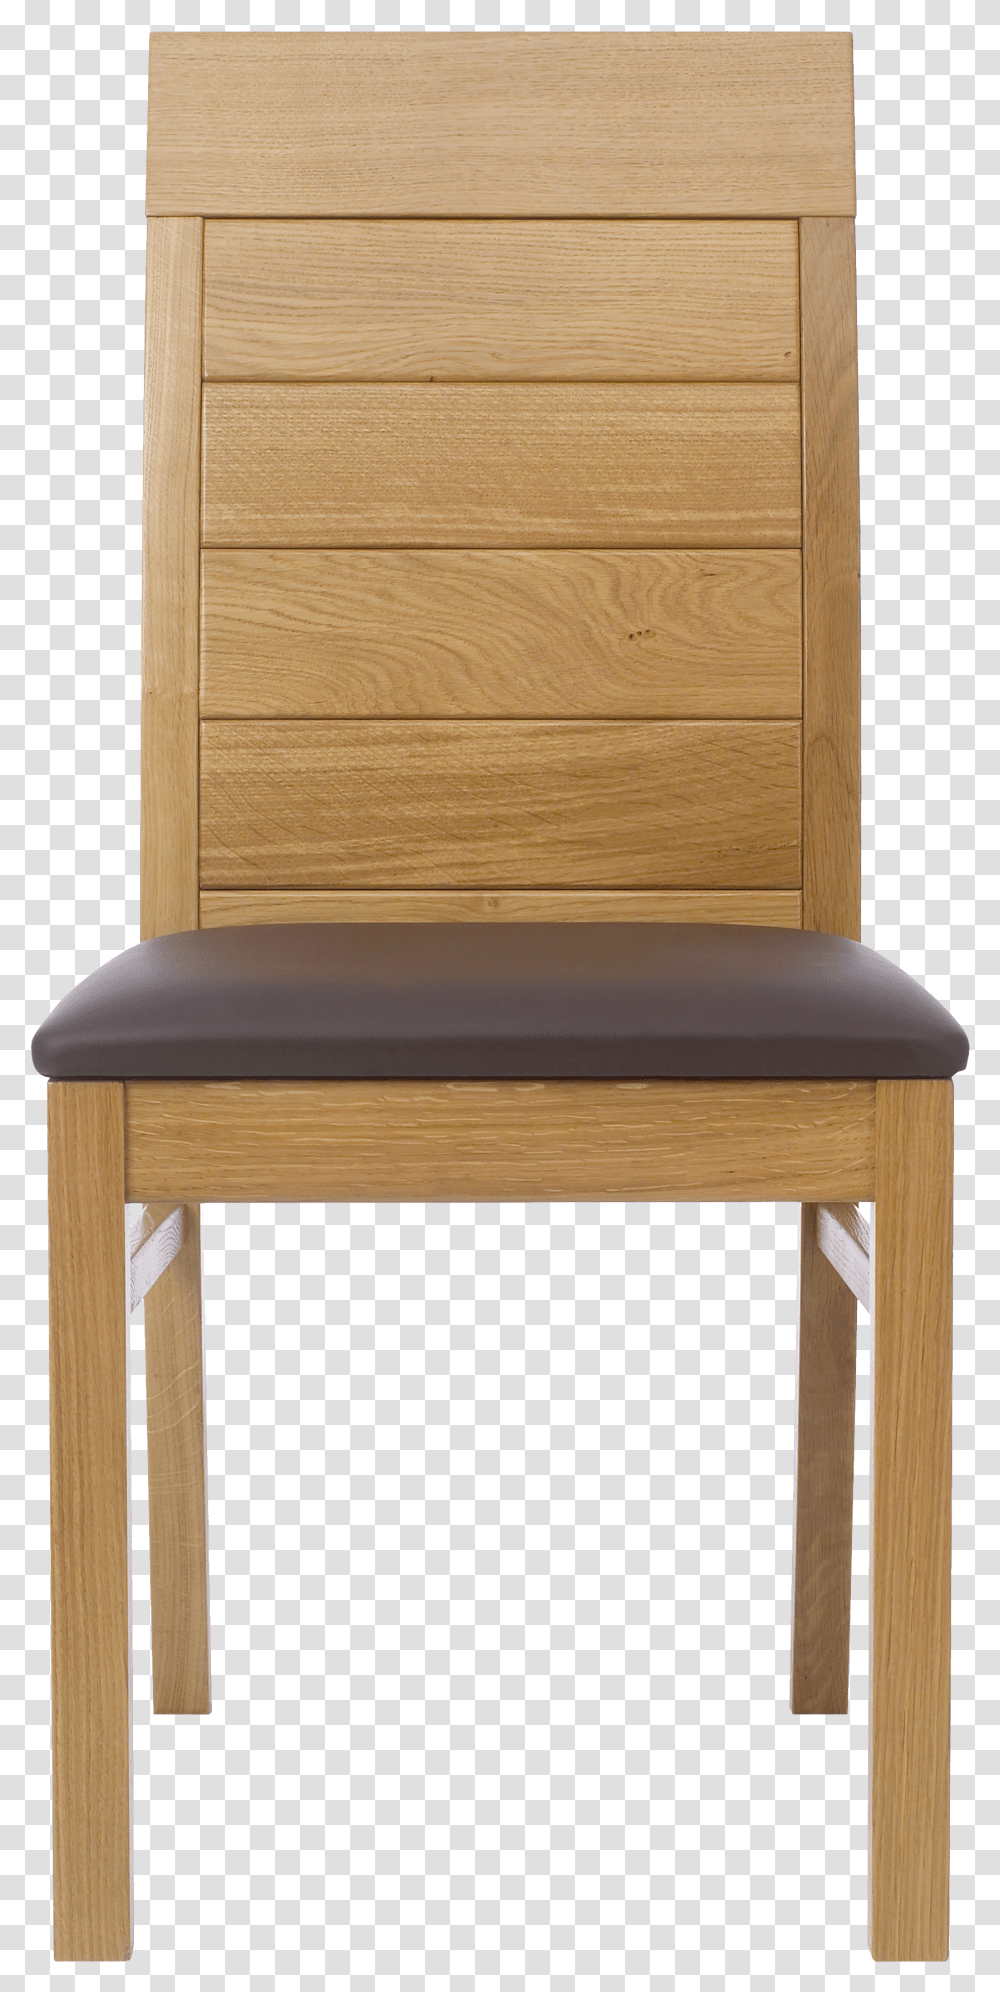 Chair Image Wooden Chair Transparent Png